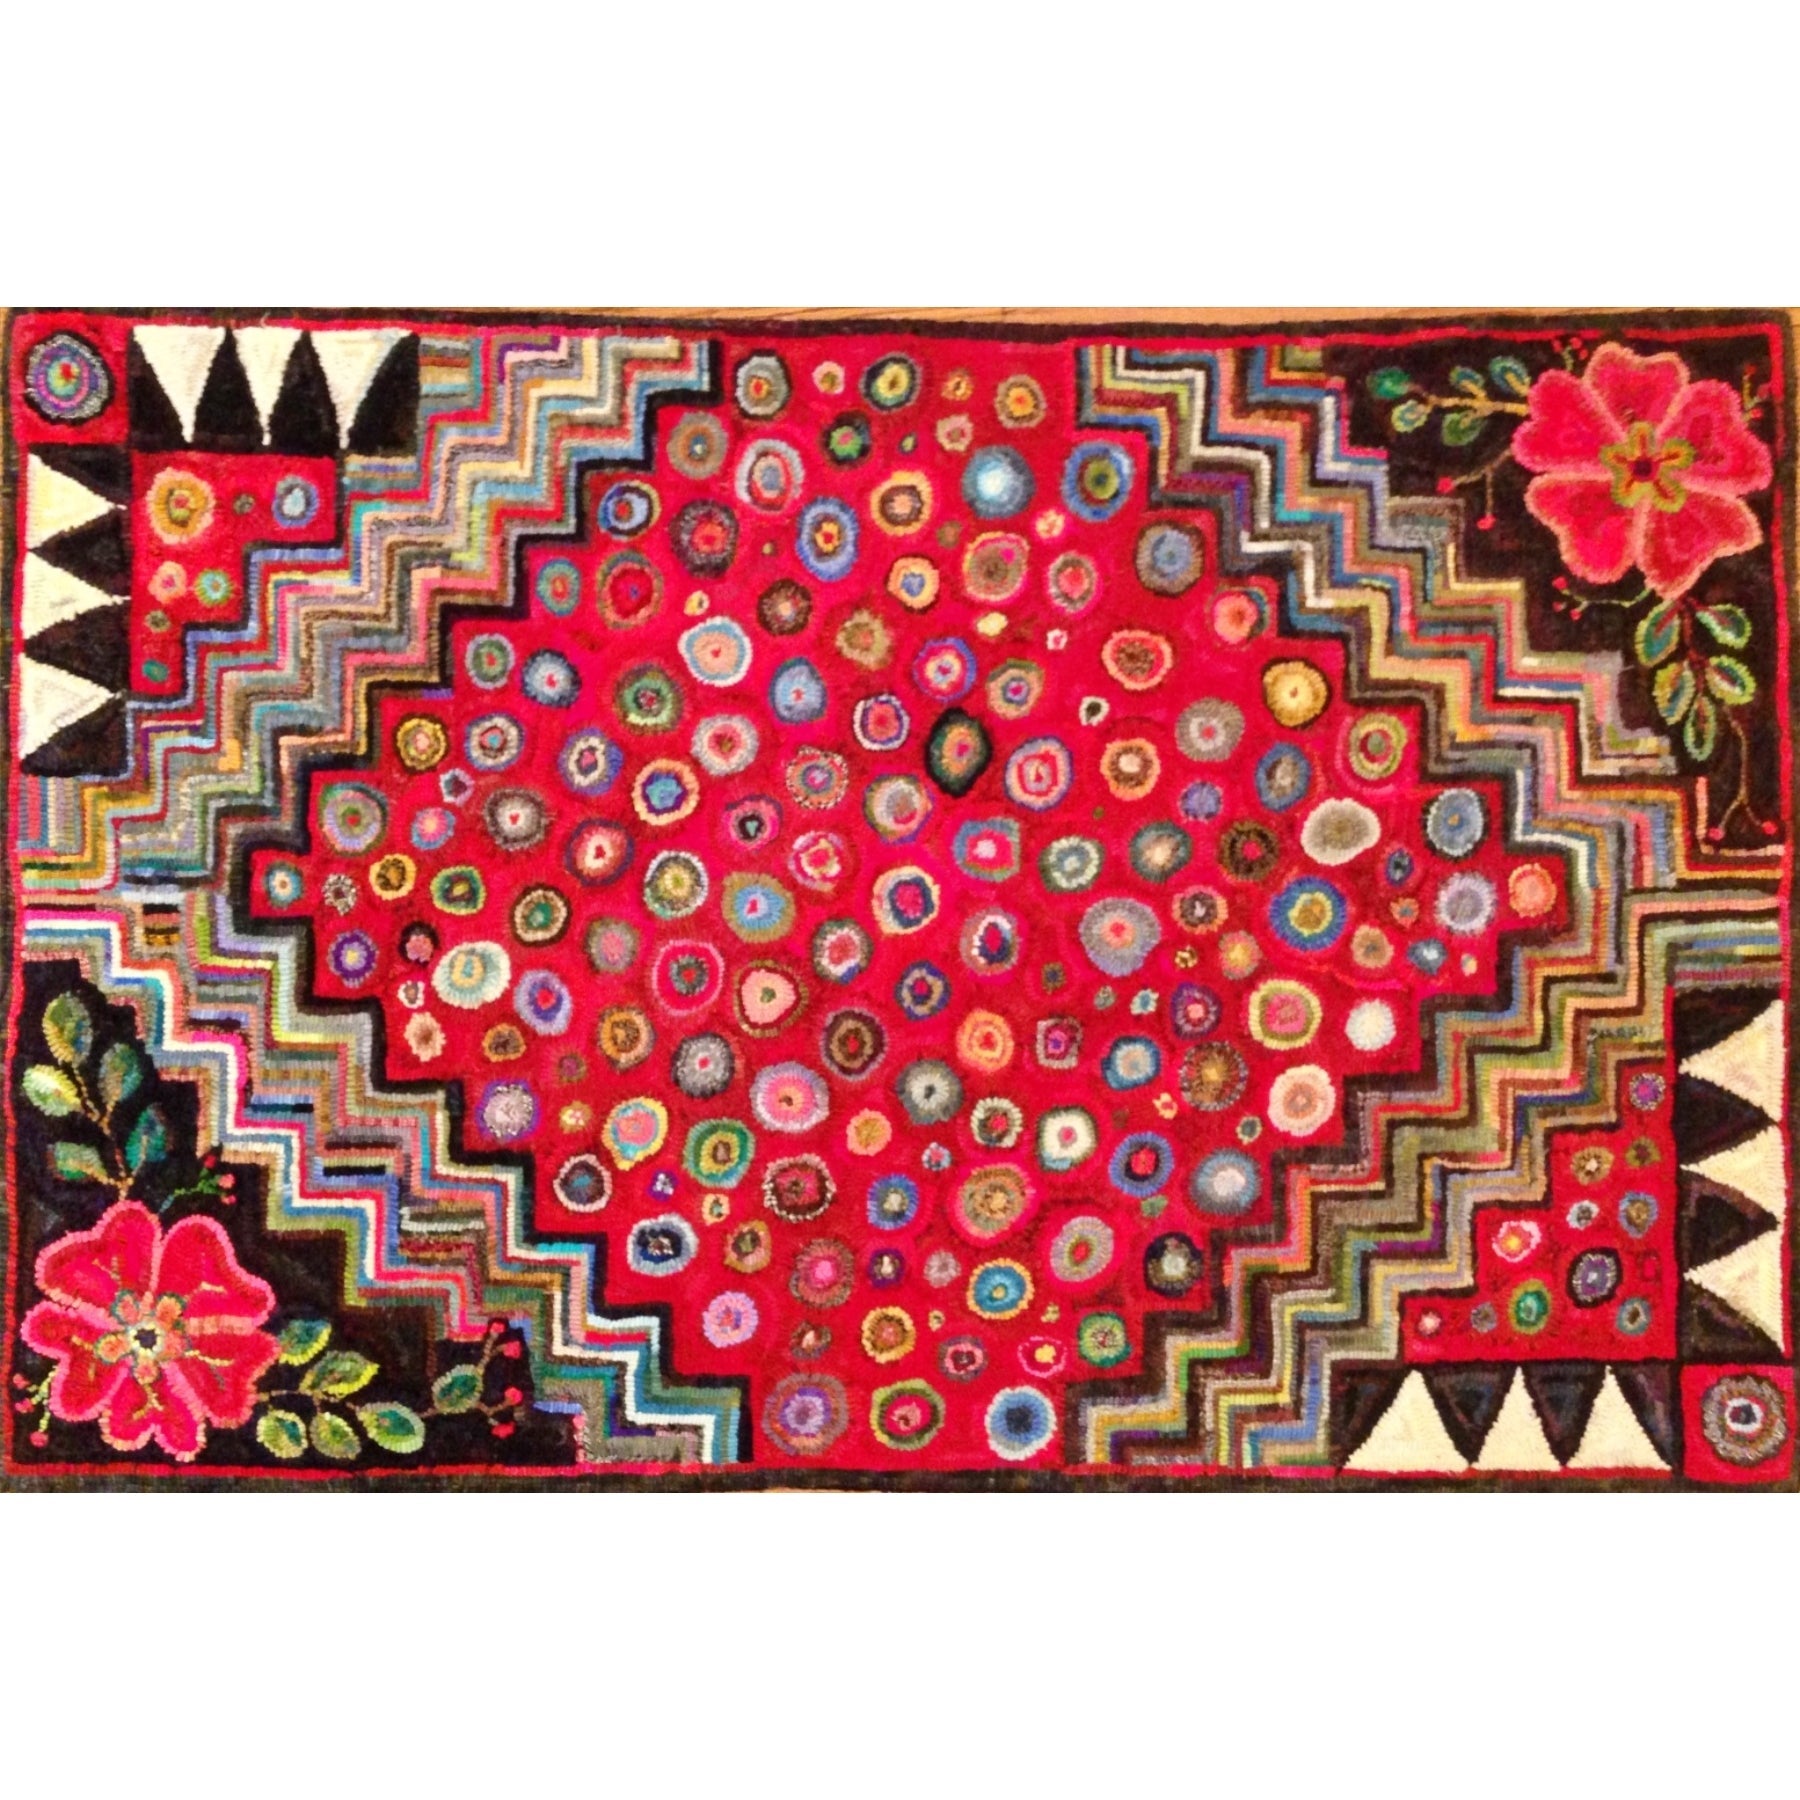 Cat Paw Floral Geometric, rug hooked by Gina Paschal